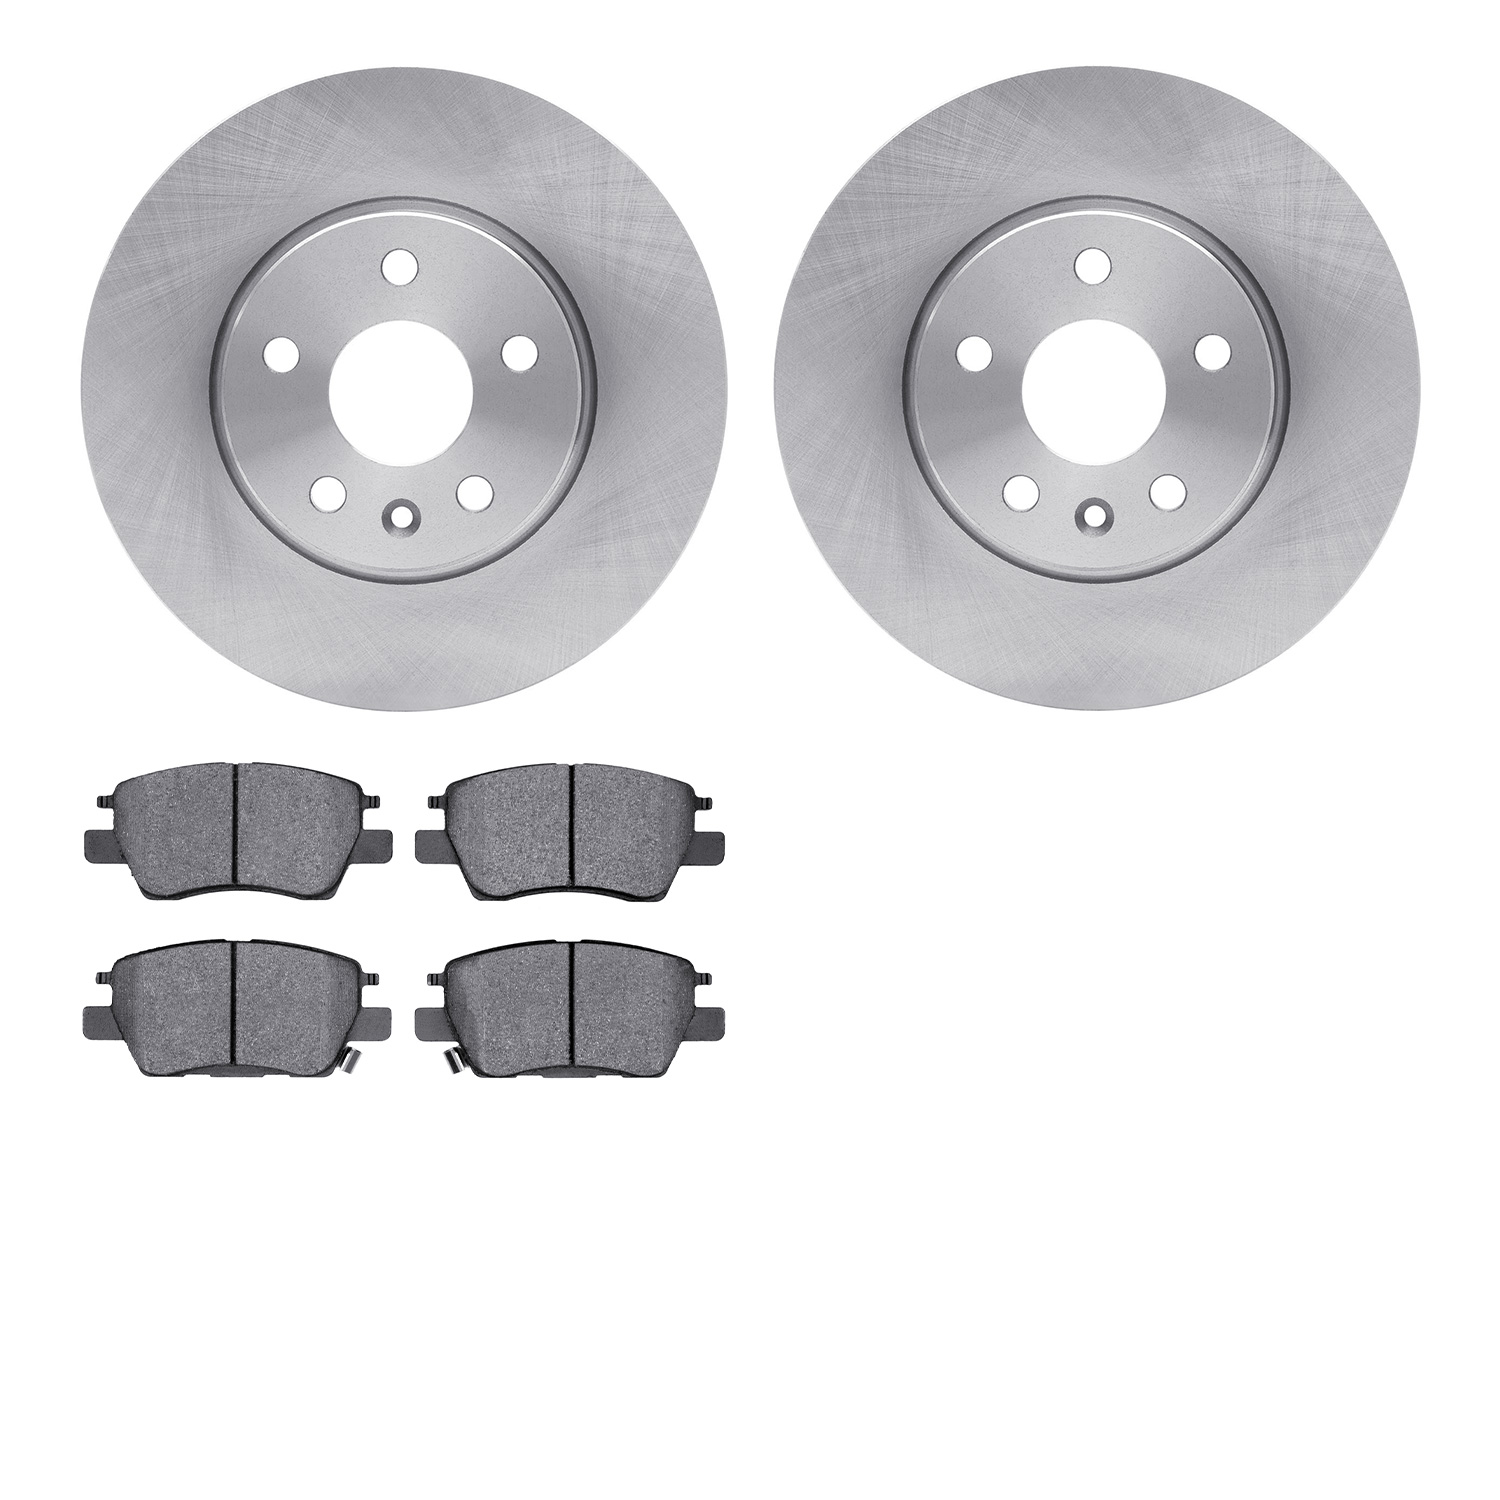 6302-47072 Brake Rotors with 3000-Series Ceramic Brake Pads Kit, Fits Select GM, Position: Front